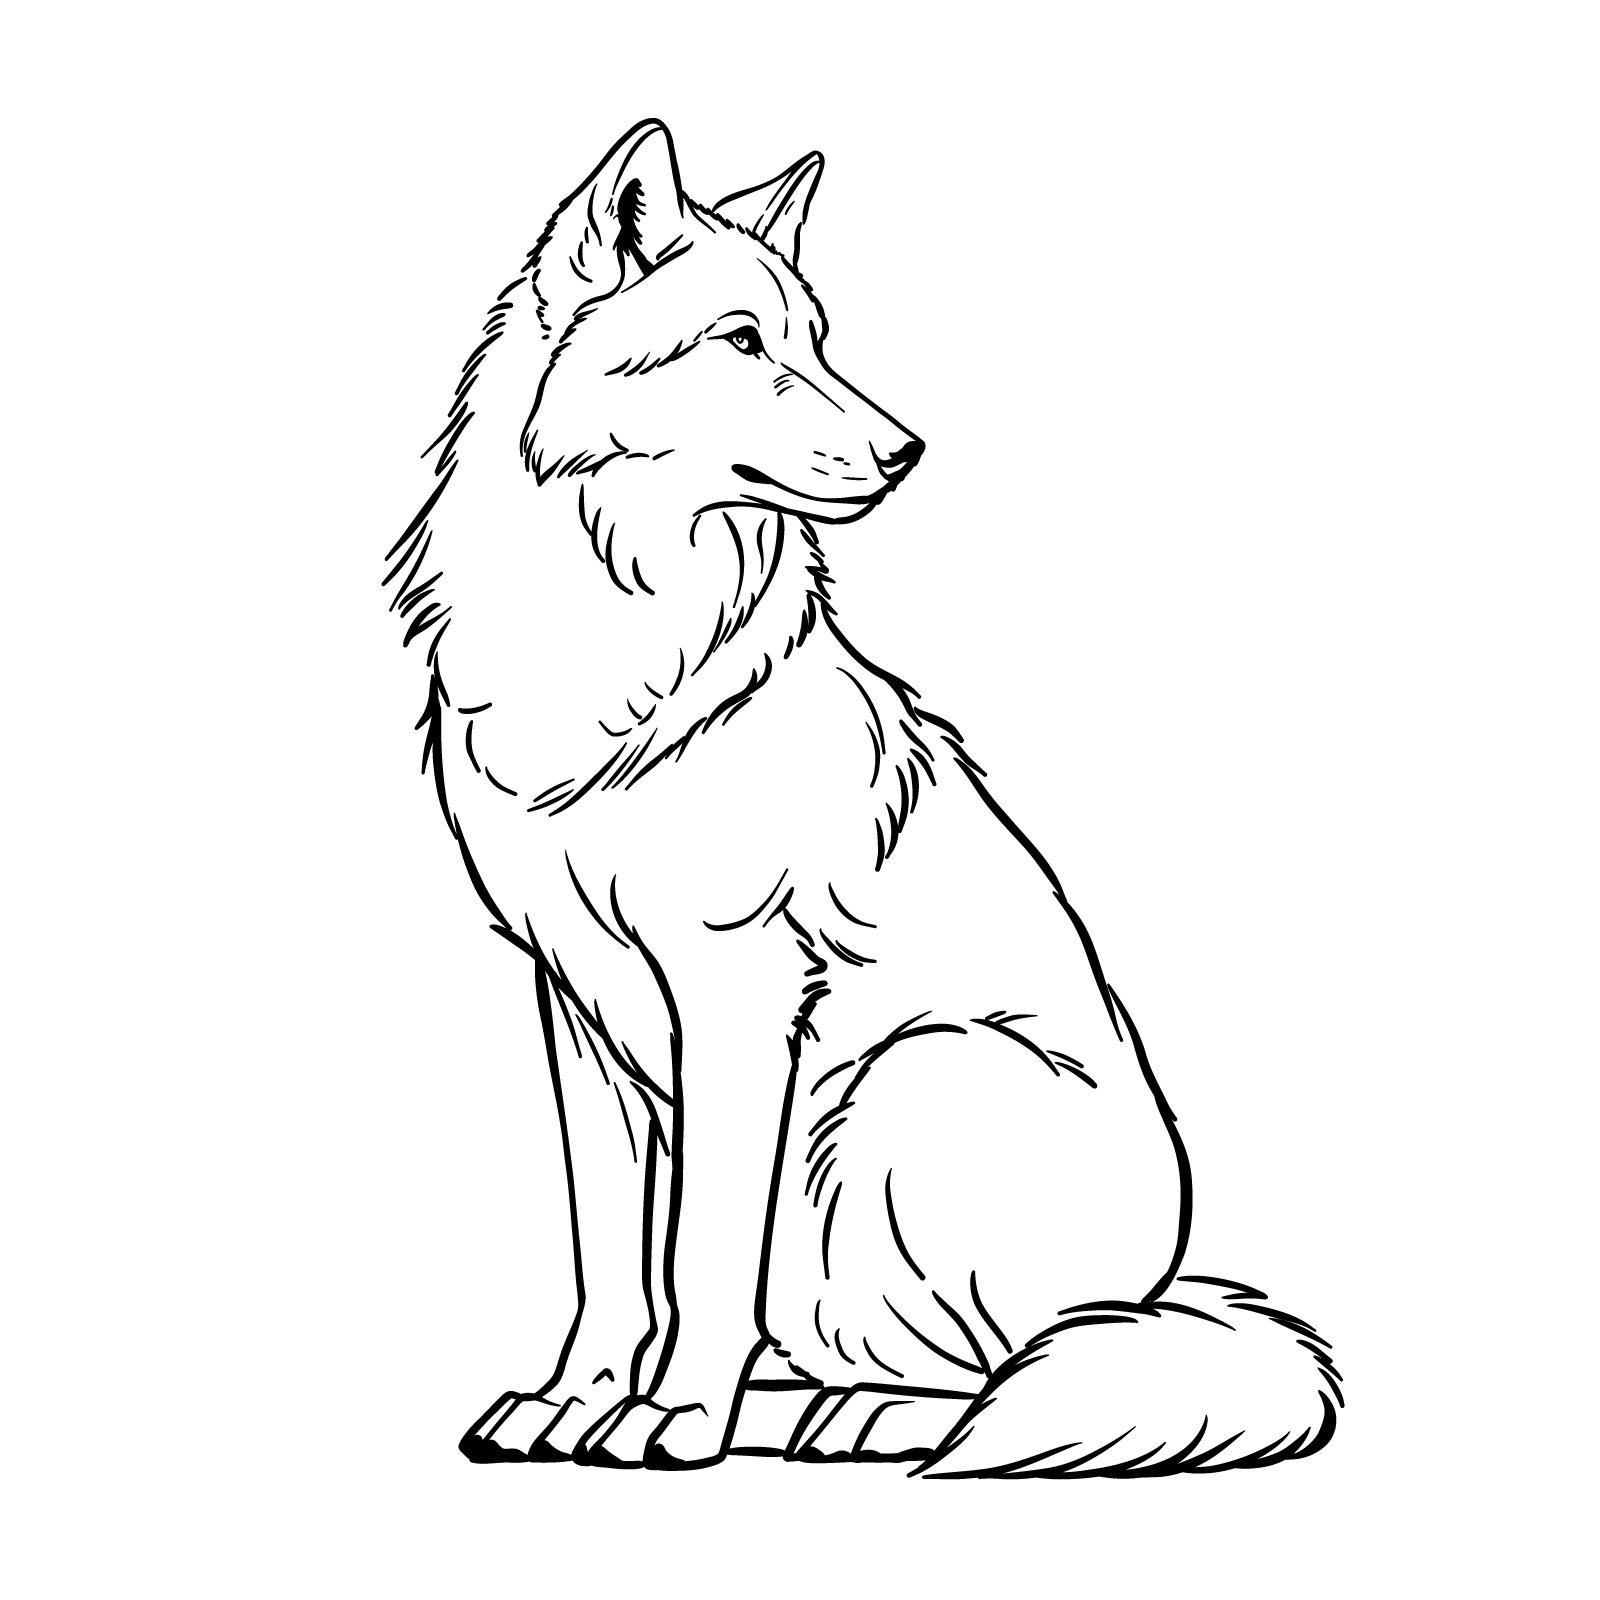 Completed inked sketch of a sitting wolf - step 16